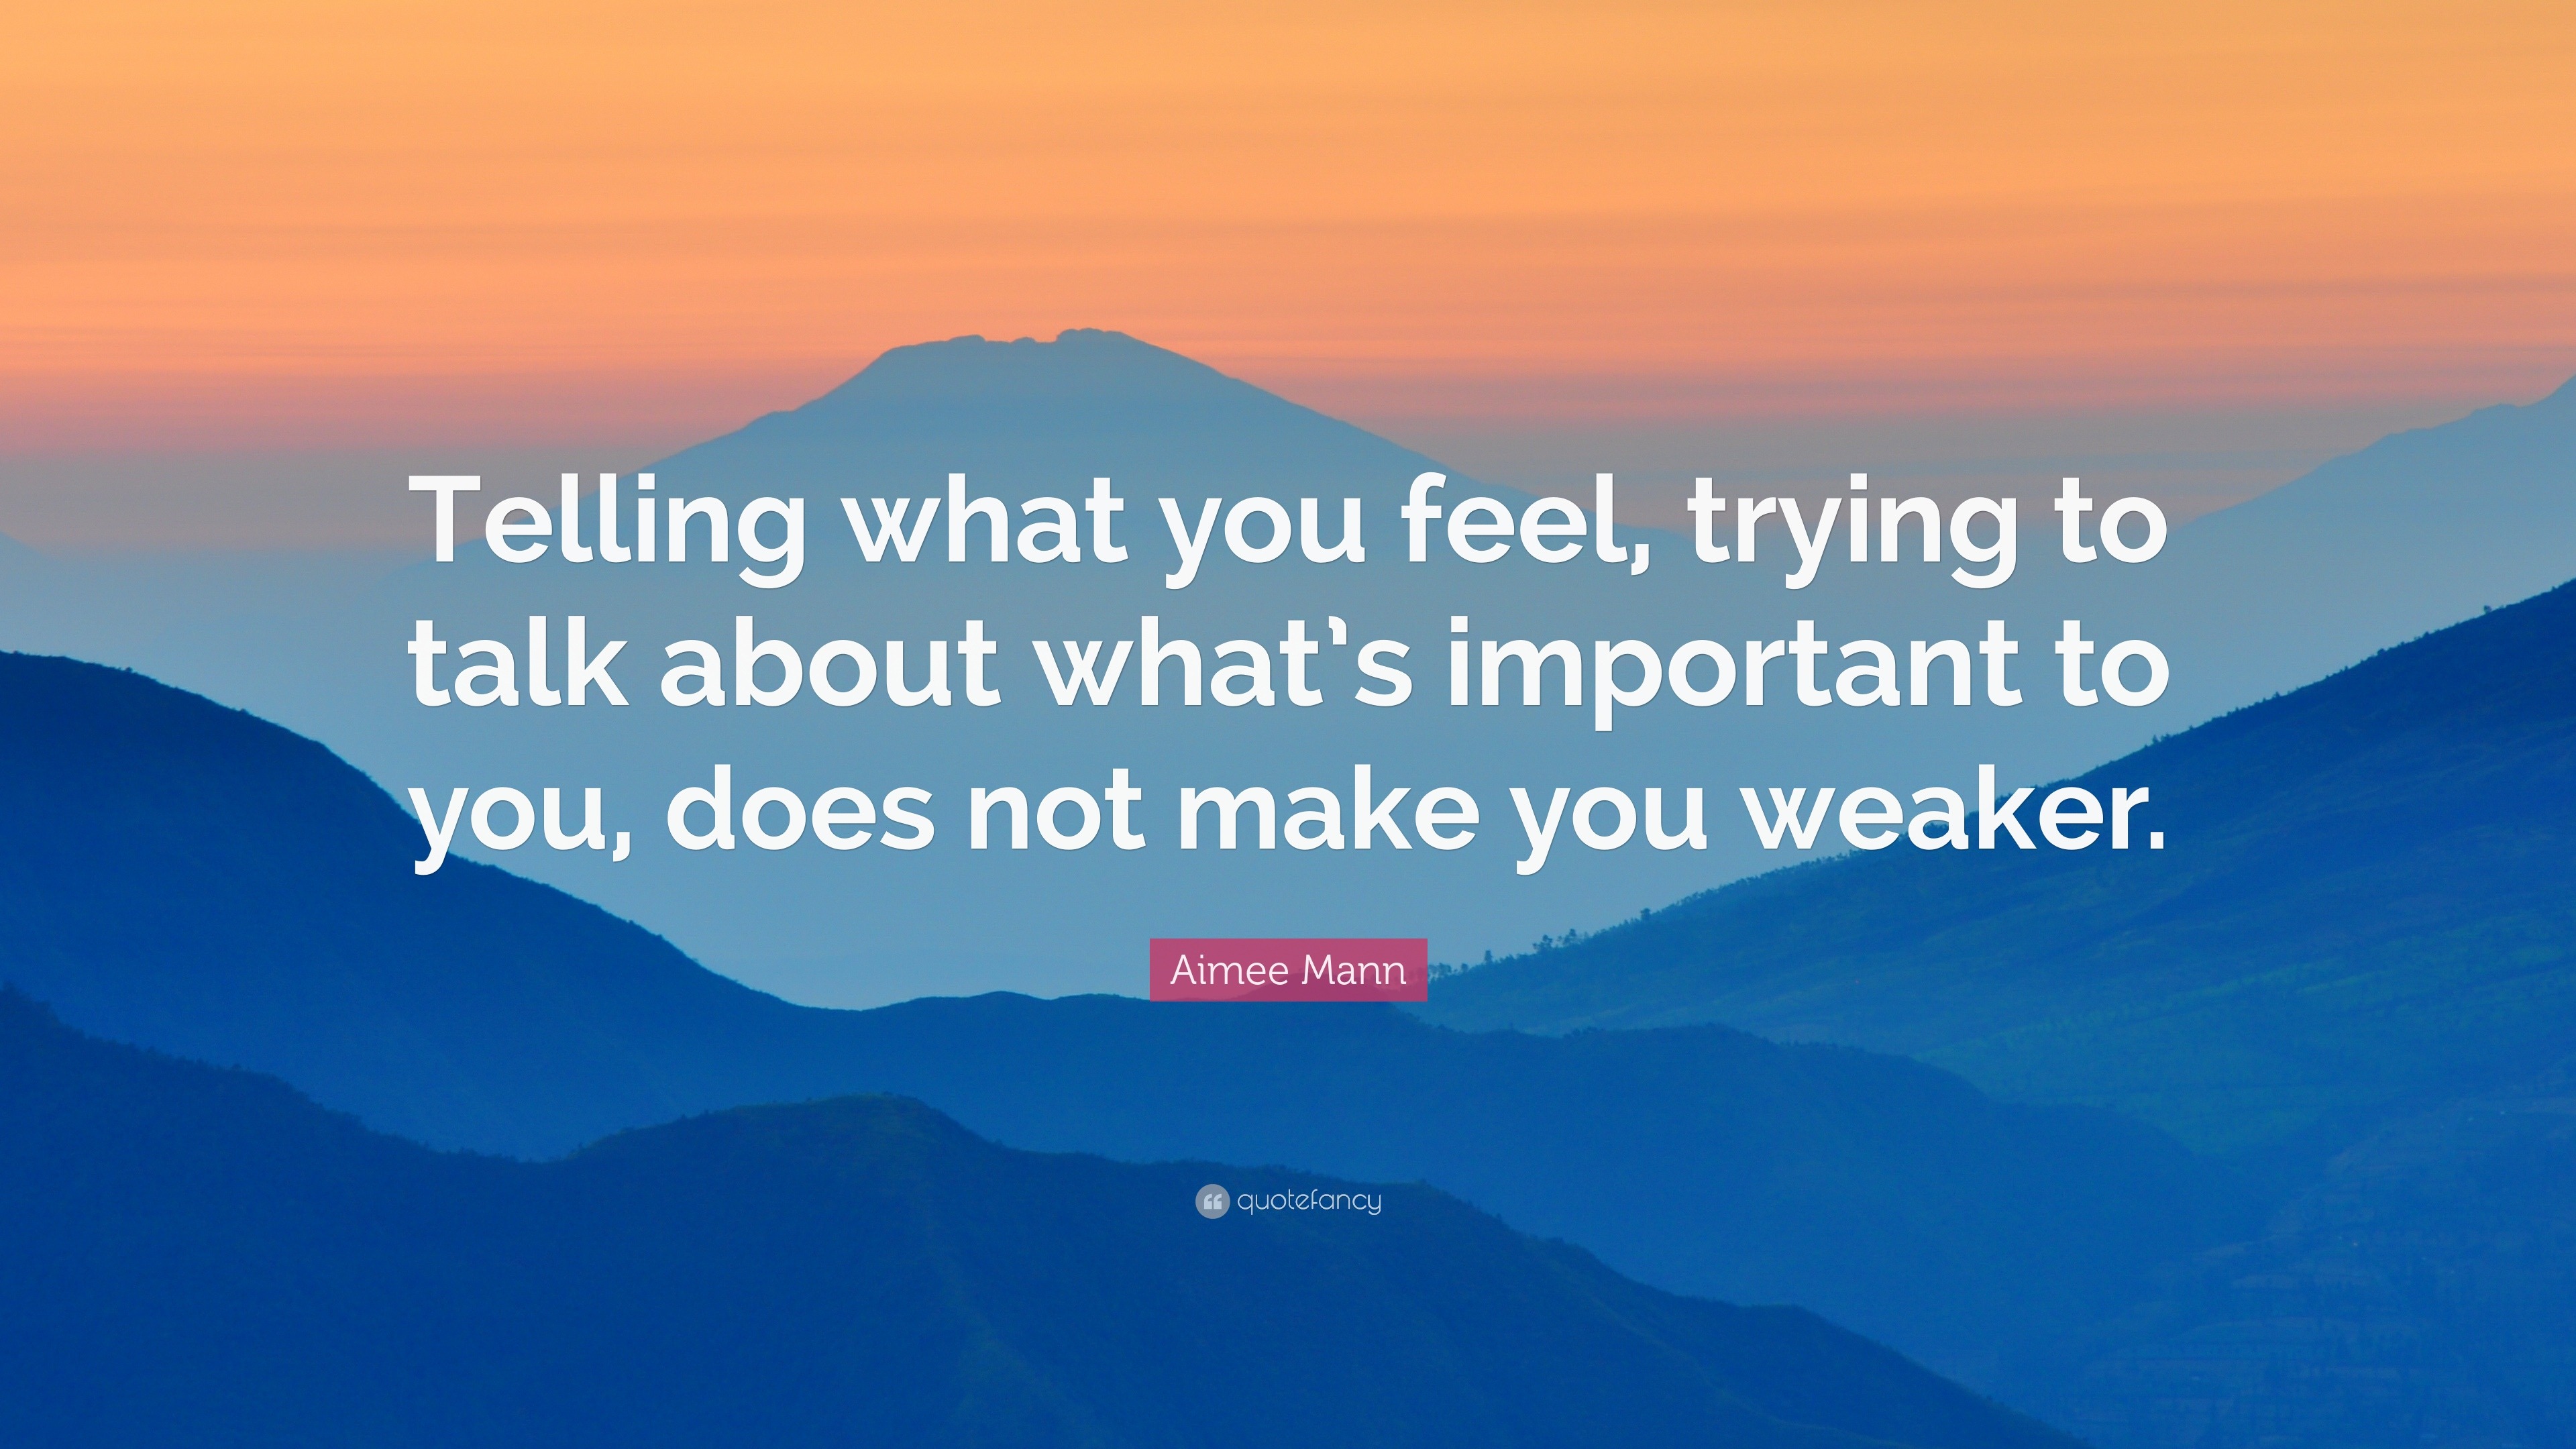 Aimee Mann Quote: “Telling what you feel, trying to talk about what’s ...